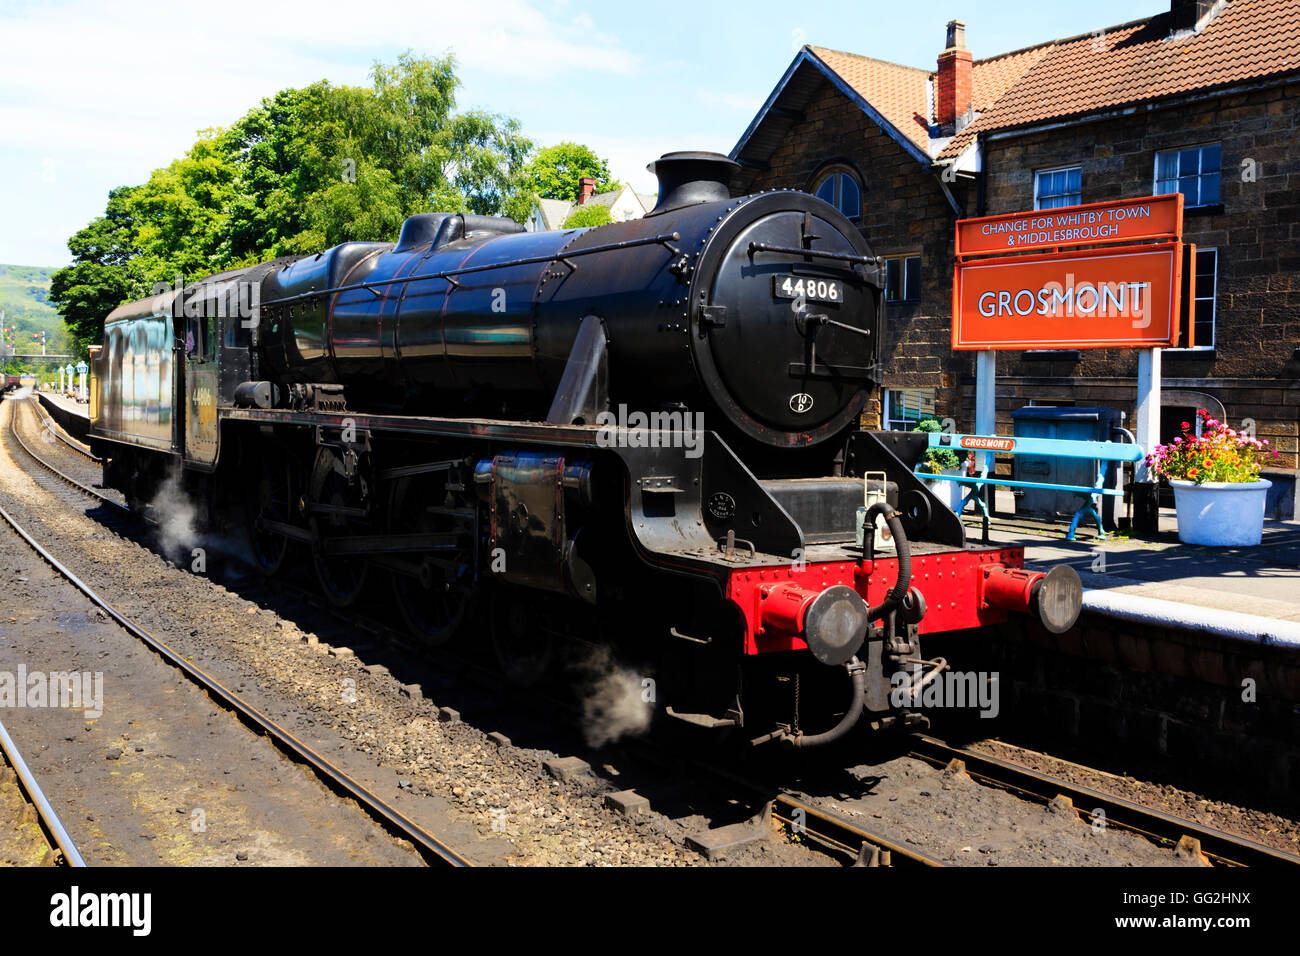 Black 5, 4-6-0, Number 44806 steam engine of the NYMR at Grosmont station. Stock Photo